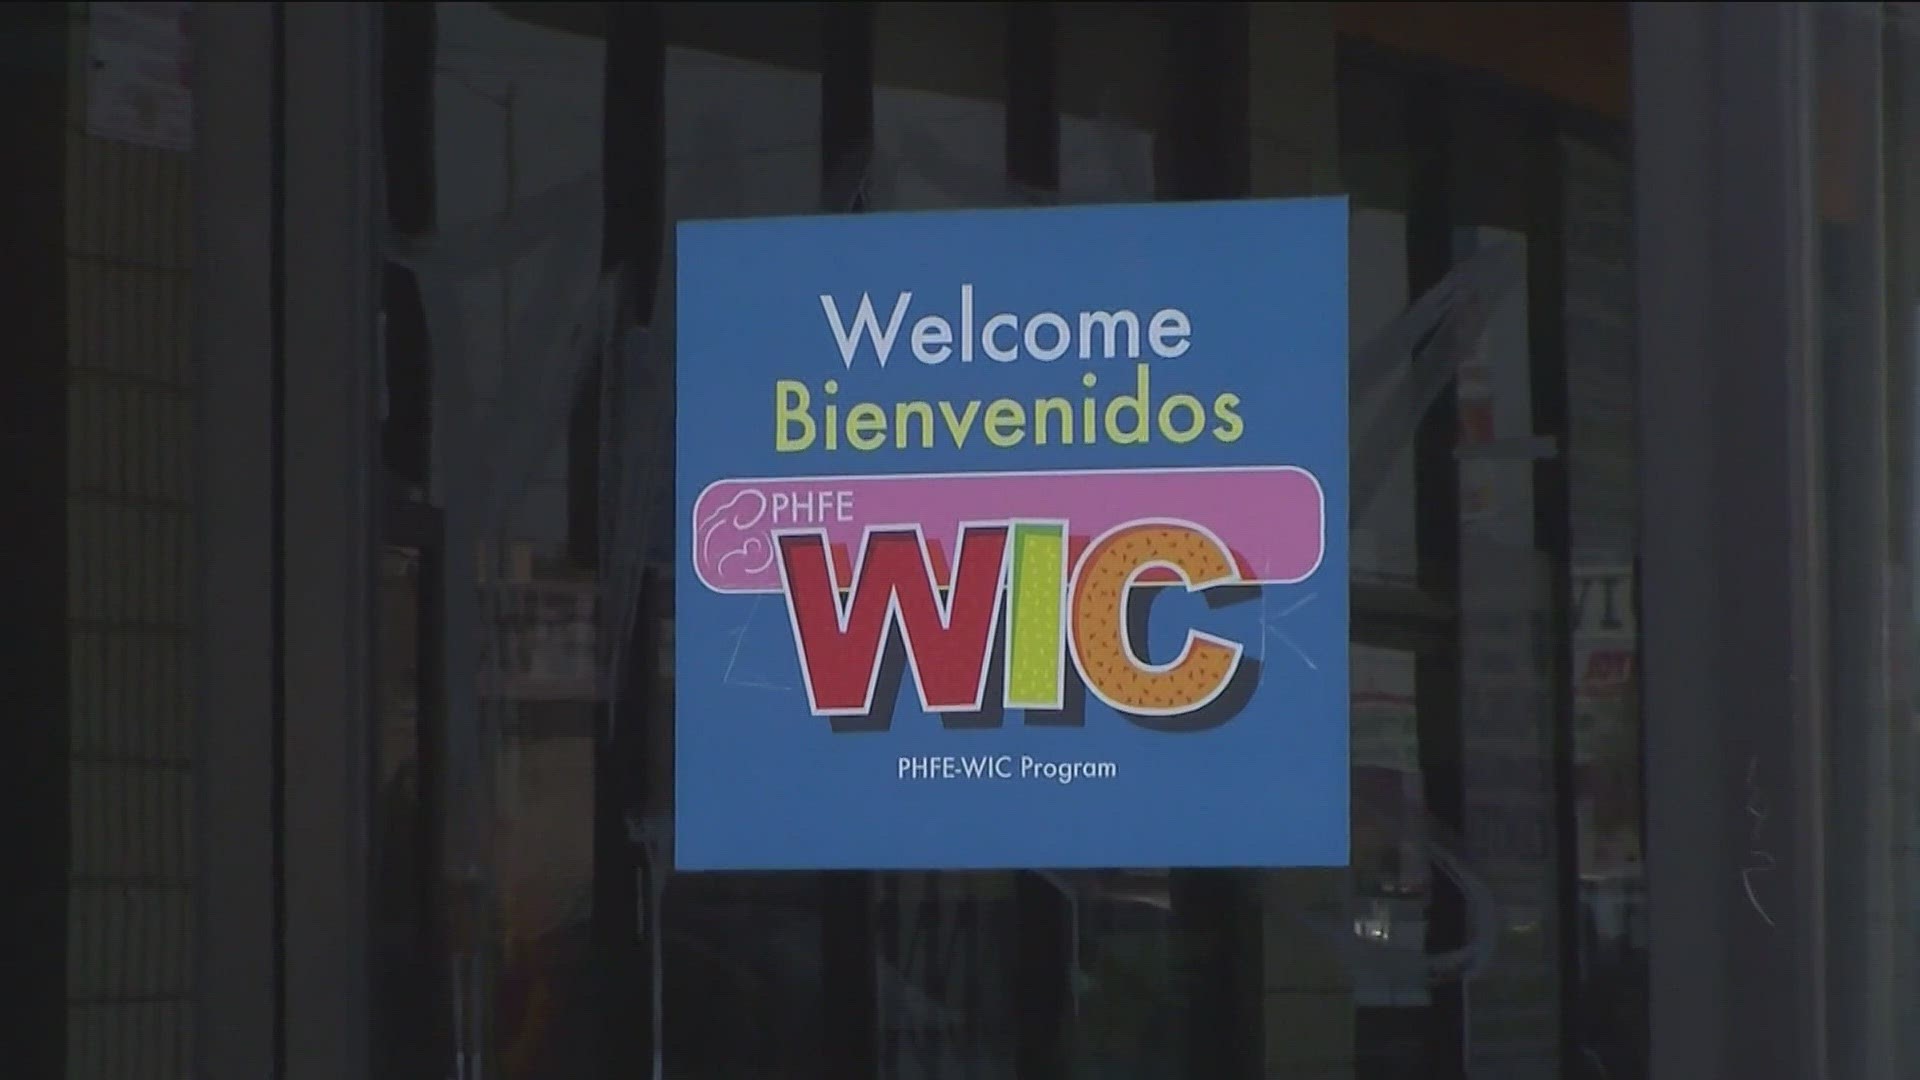 WIC is a federally funded program that provides essential nutrition, breastfeeding support and other resources to families across the country.